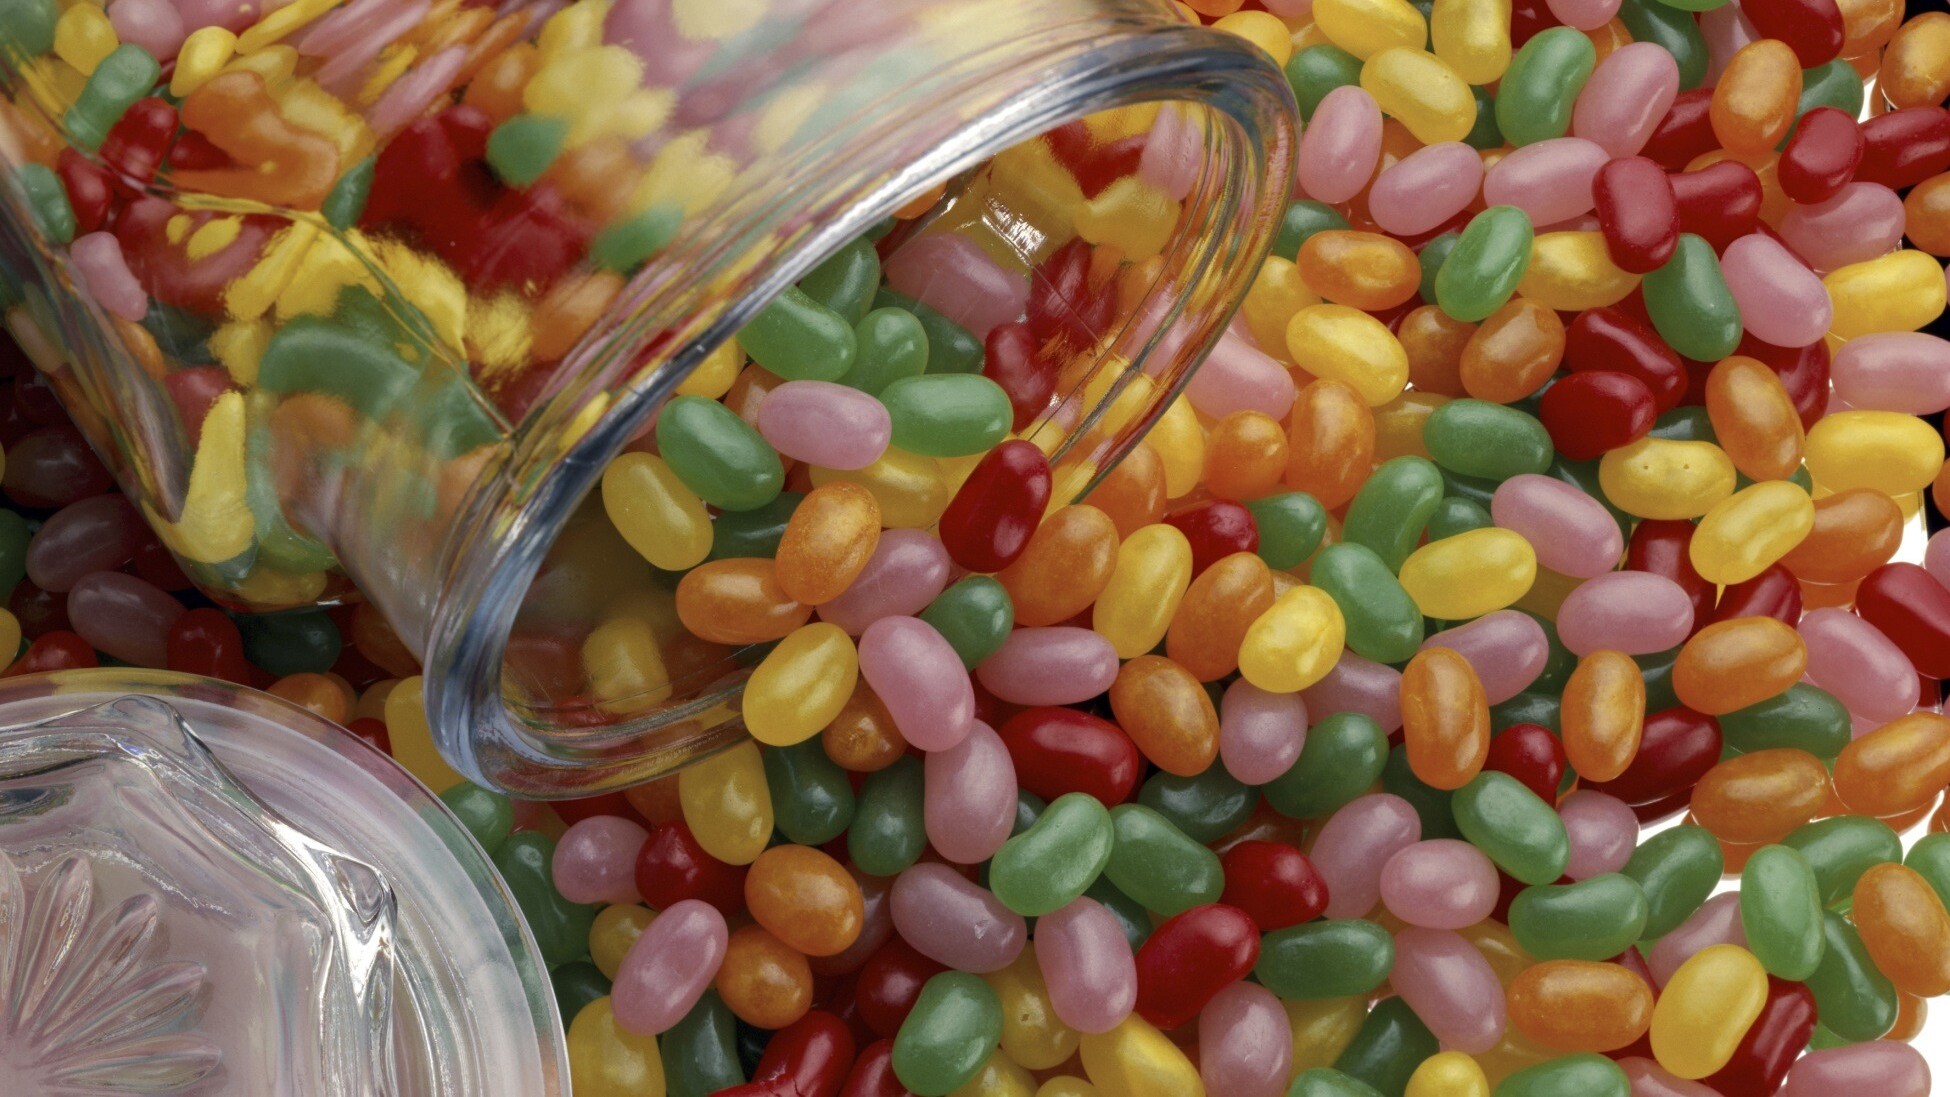 Android Jelly Bean adoption climbs 3.4% to 28.4% in April as Ice Cream Sandwich sinks to 27.5%